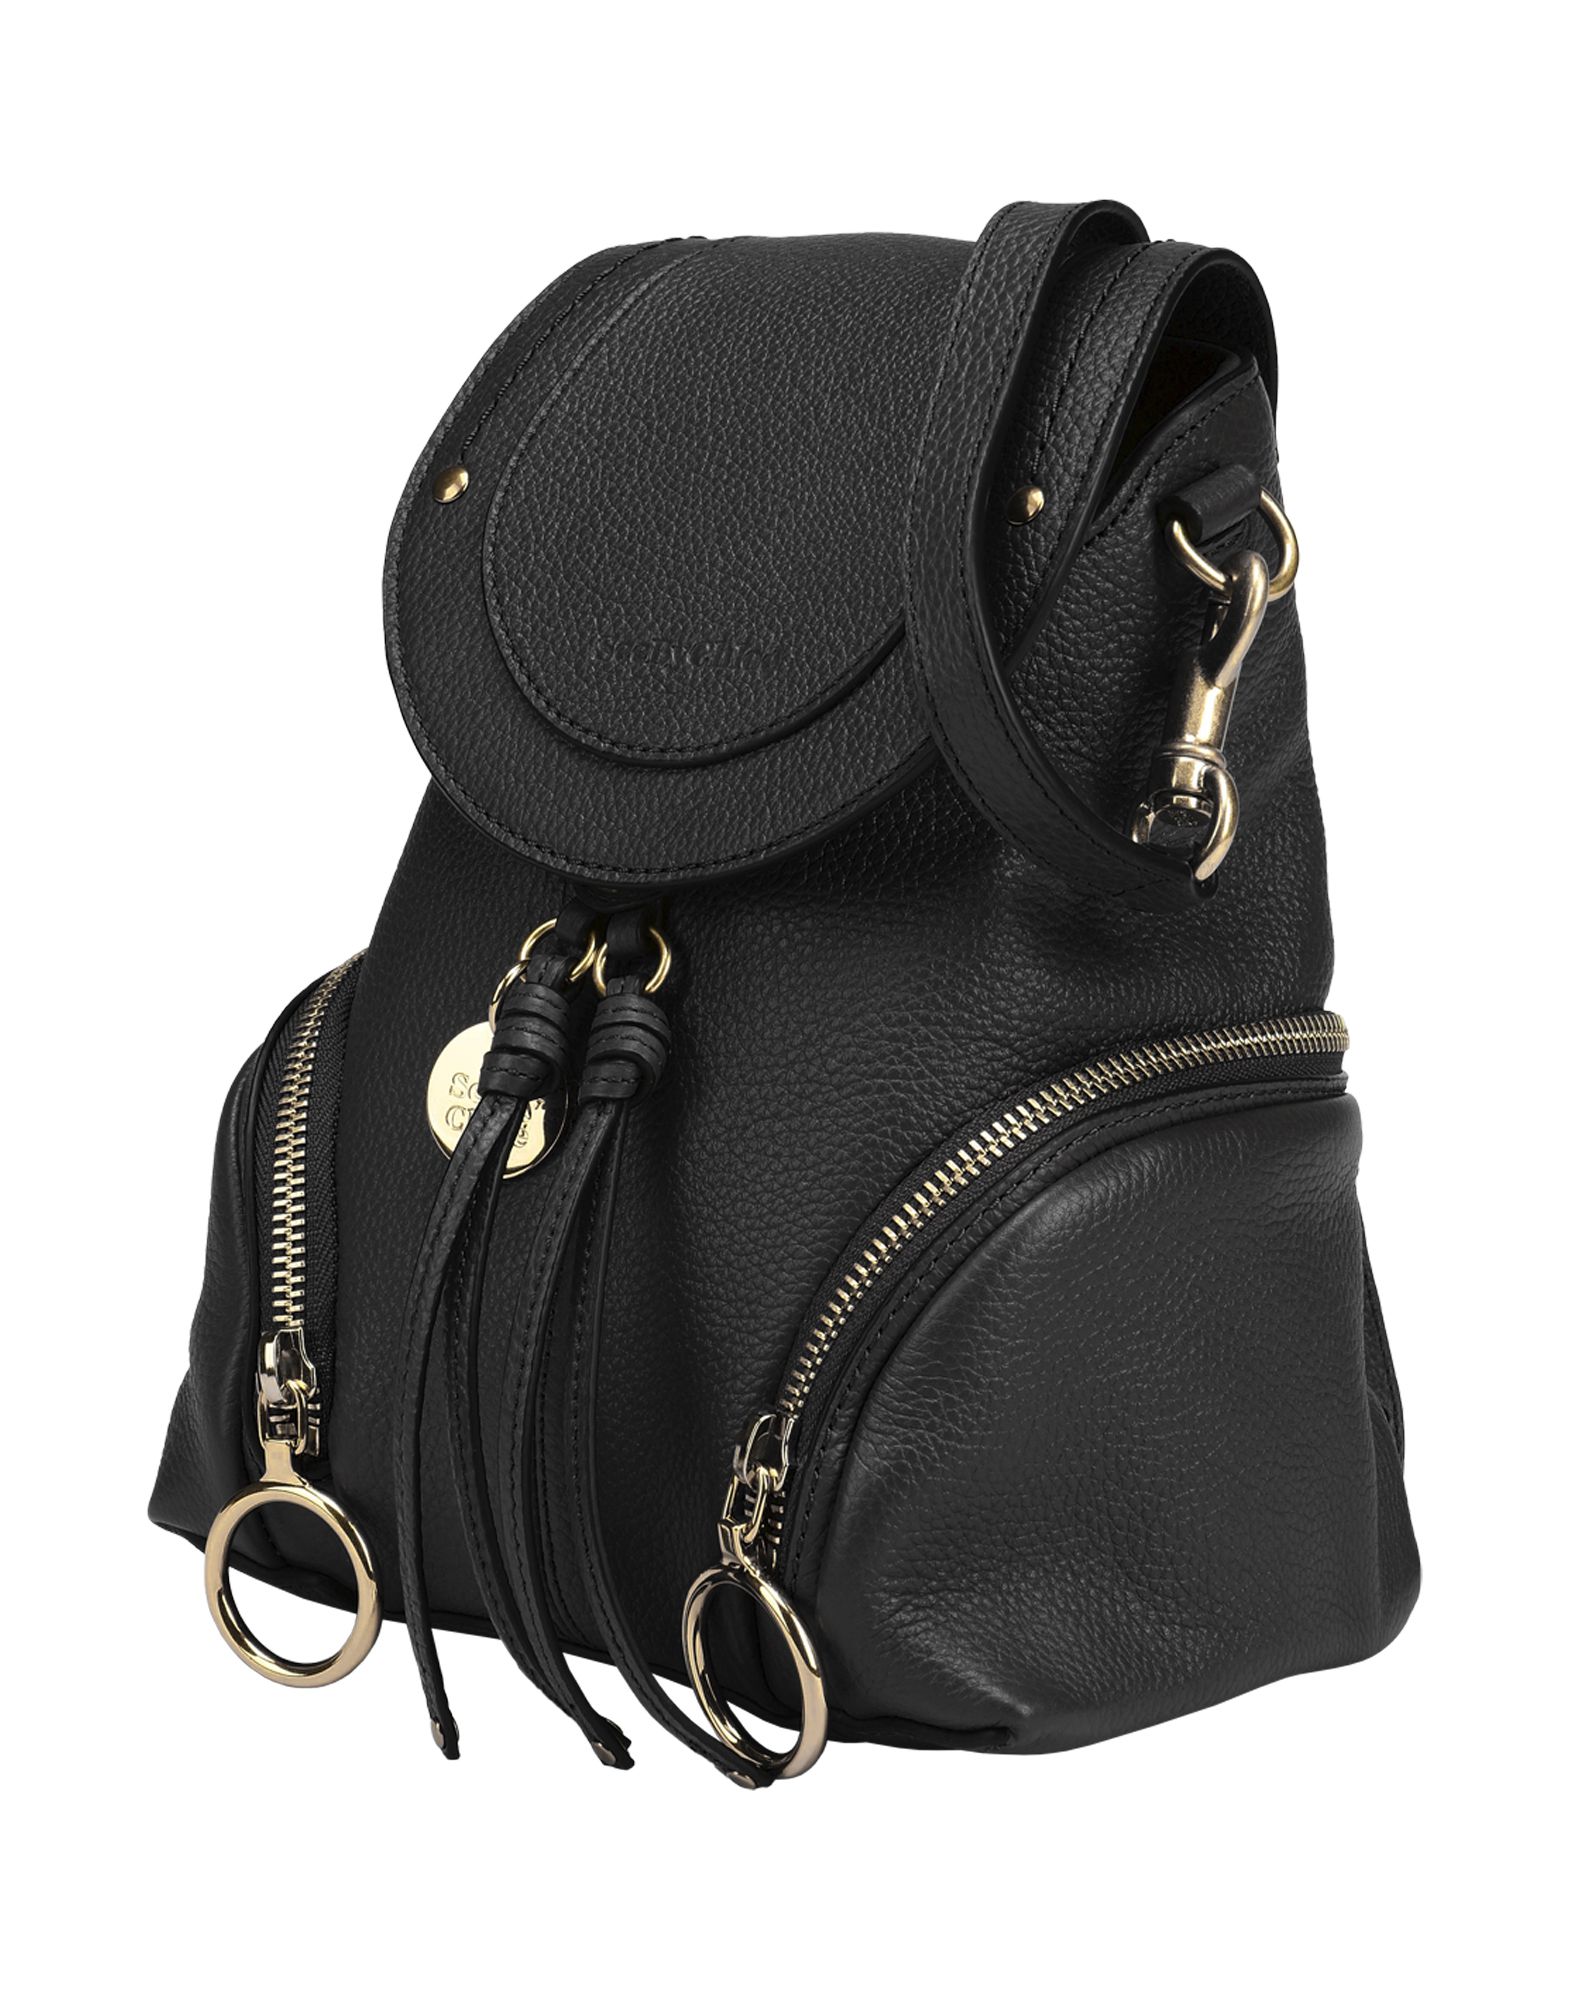 SEE BY CHLOÉ Backpack & fanny pack,45403666JQ 1